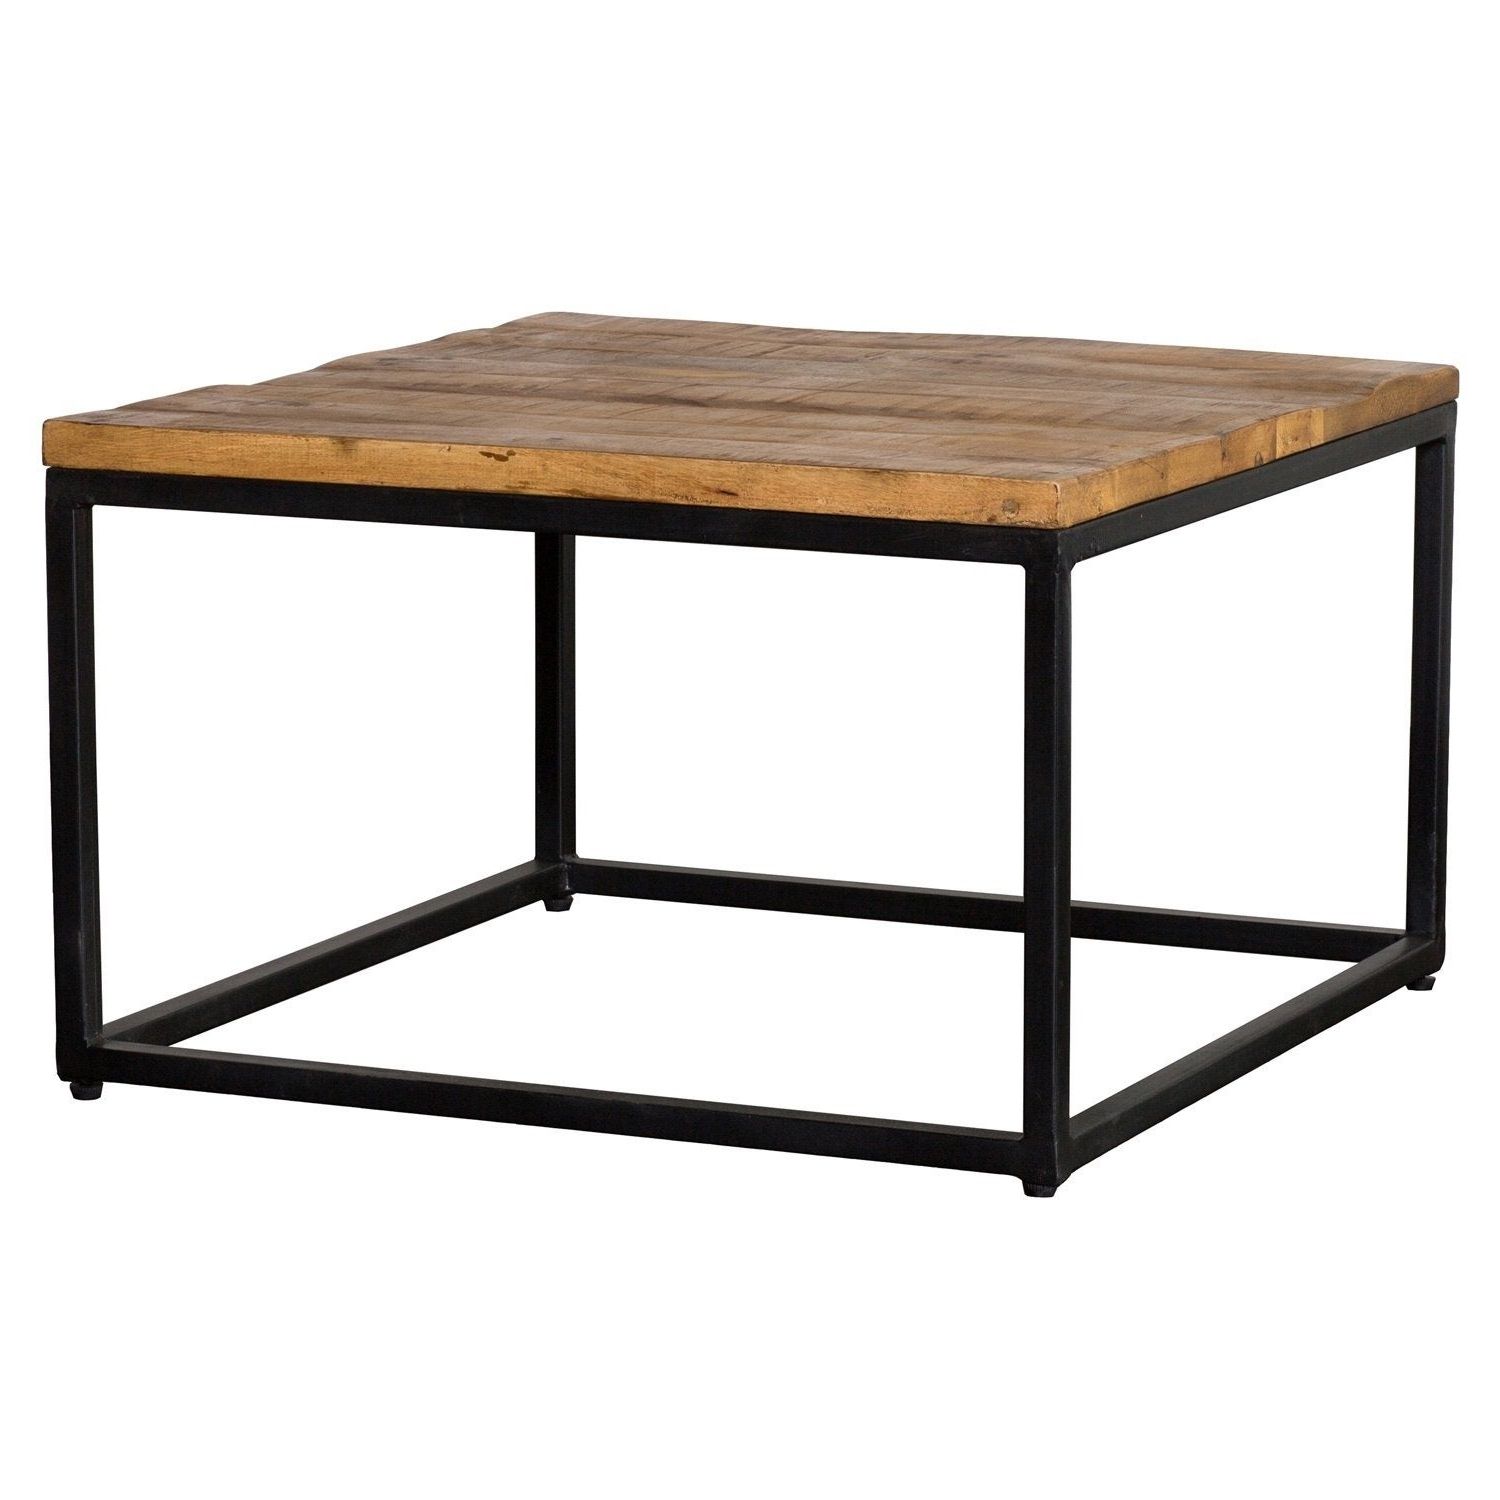 Most Popular Paris Natural Wood And Iron 30 Inch Square Coffee Tables Intended For Paris Natural Wood And Iron 30 Inch Square Coffee Tablekosas Home (View 1 of 20)